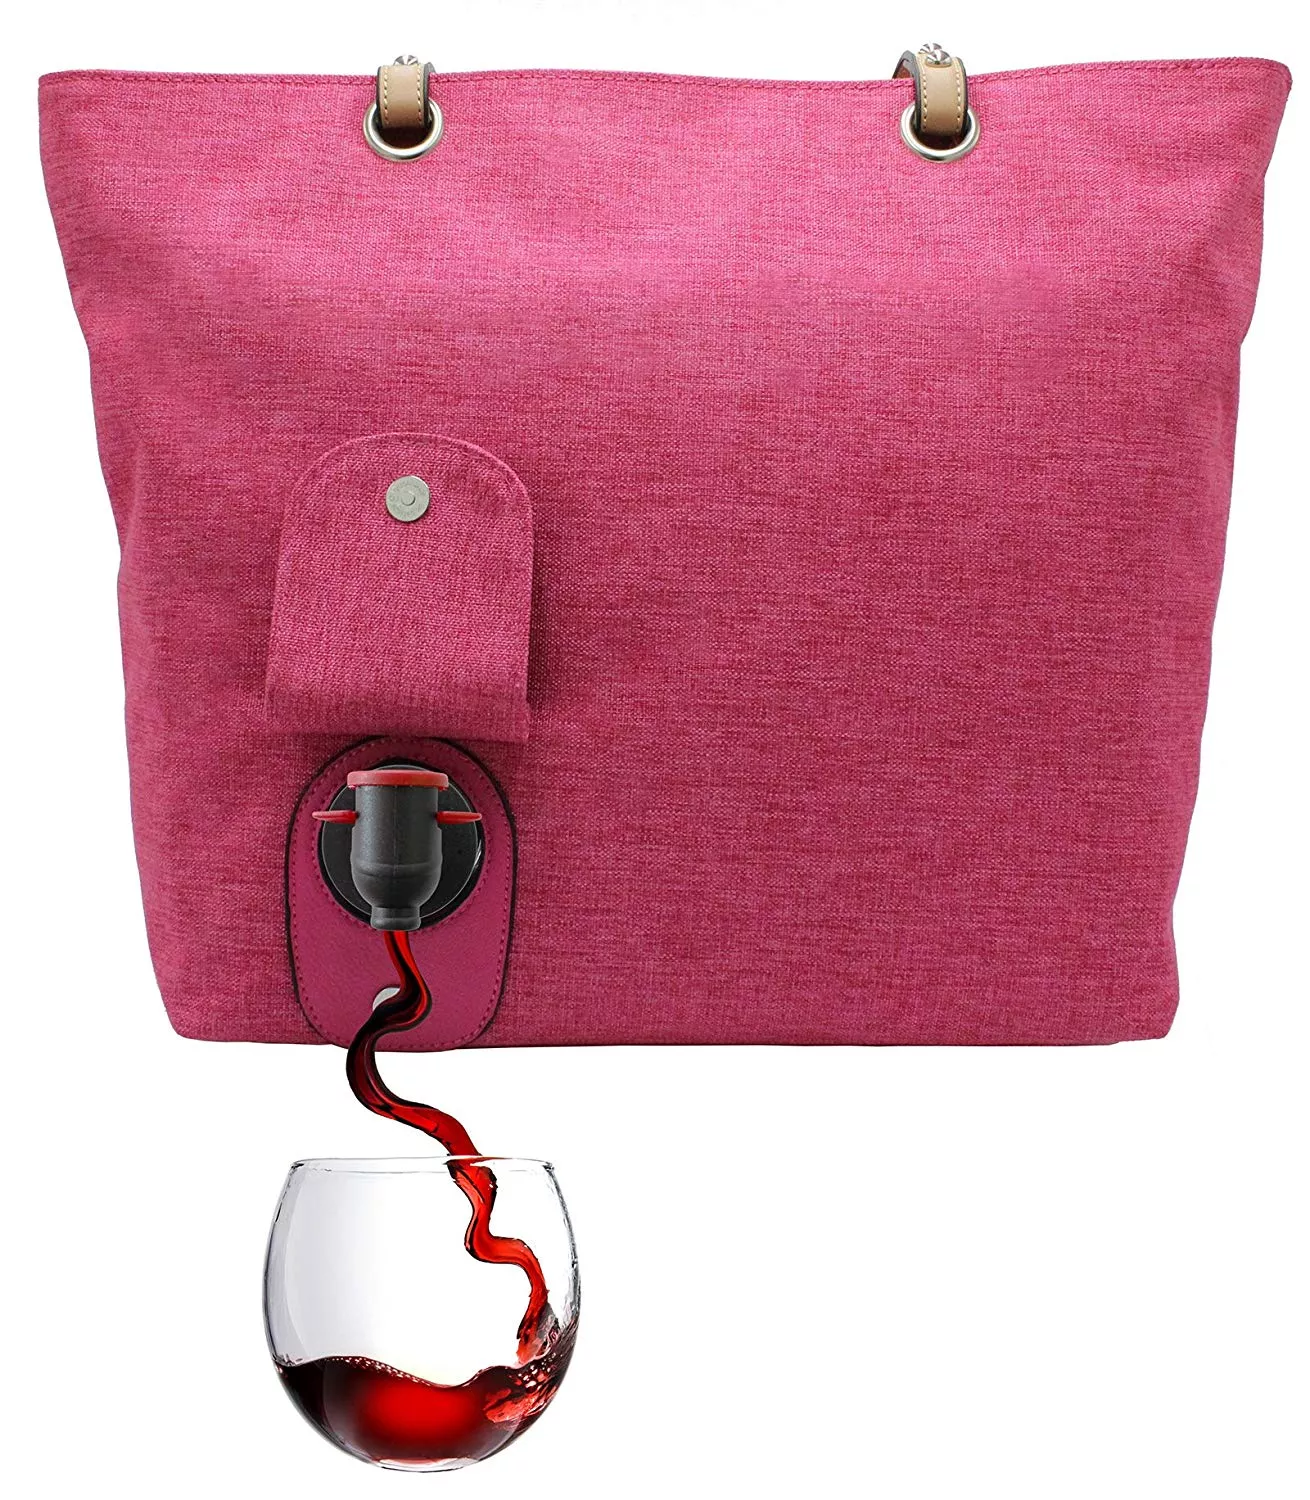 Best Wine Gifts 2023: Portovino Wine Bag for Wine Lovers at Christmas 2023